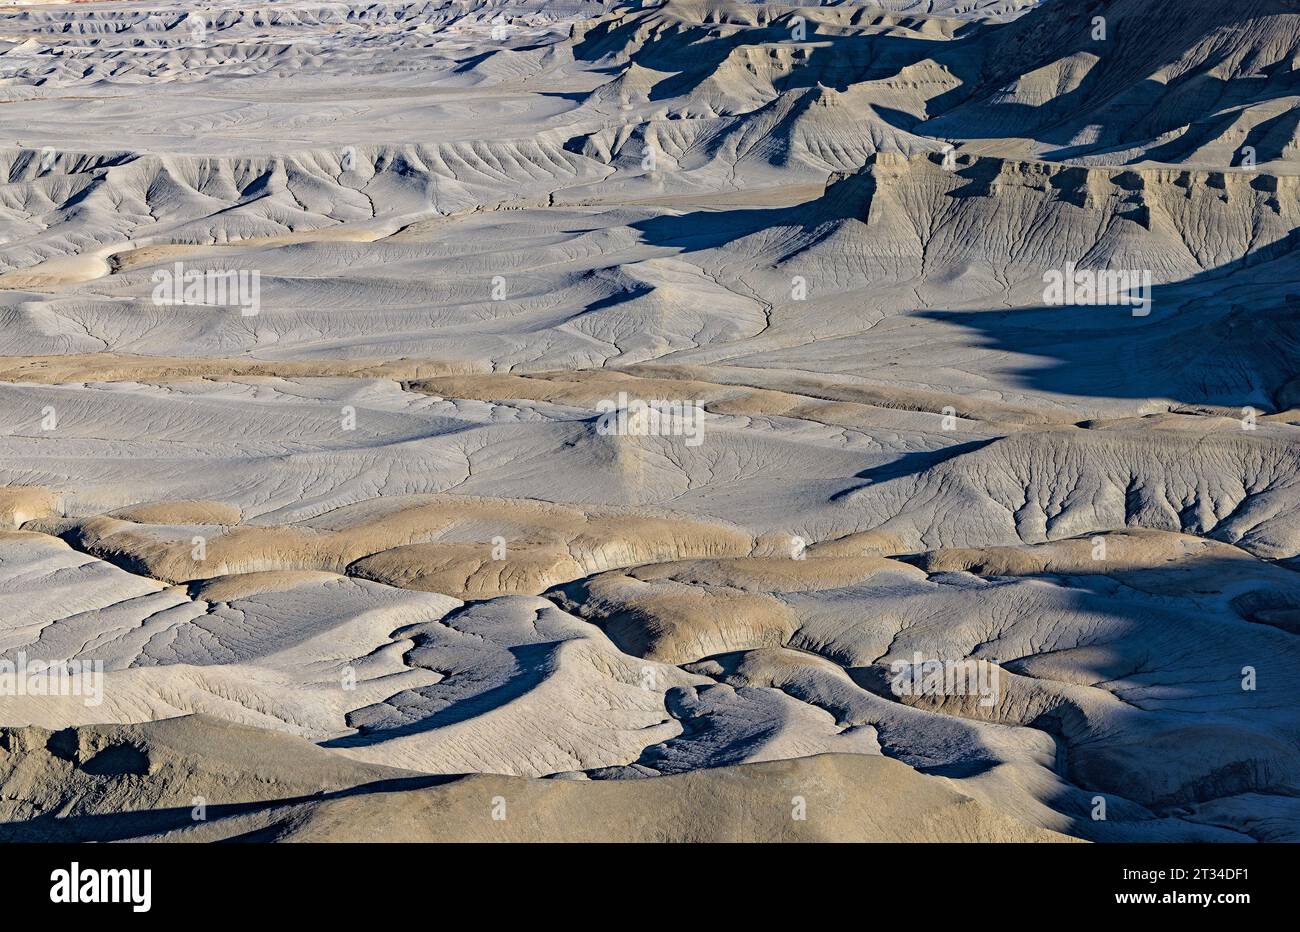 A view of the what appears to be the surface of the moon from Moonscape Overlook in the Factory Butte recreation area near Hanksville, Utah USA. Stock Photo